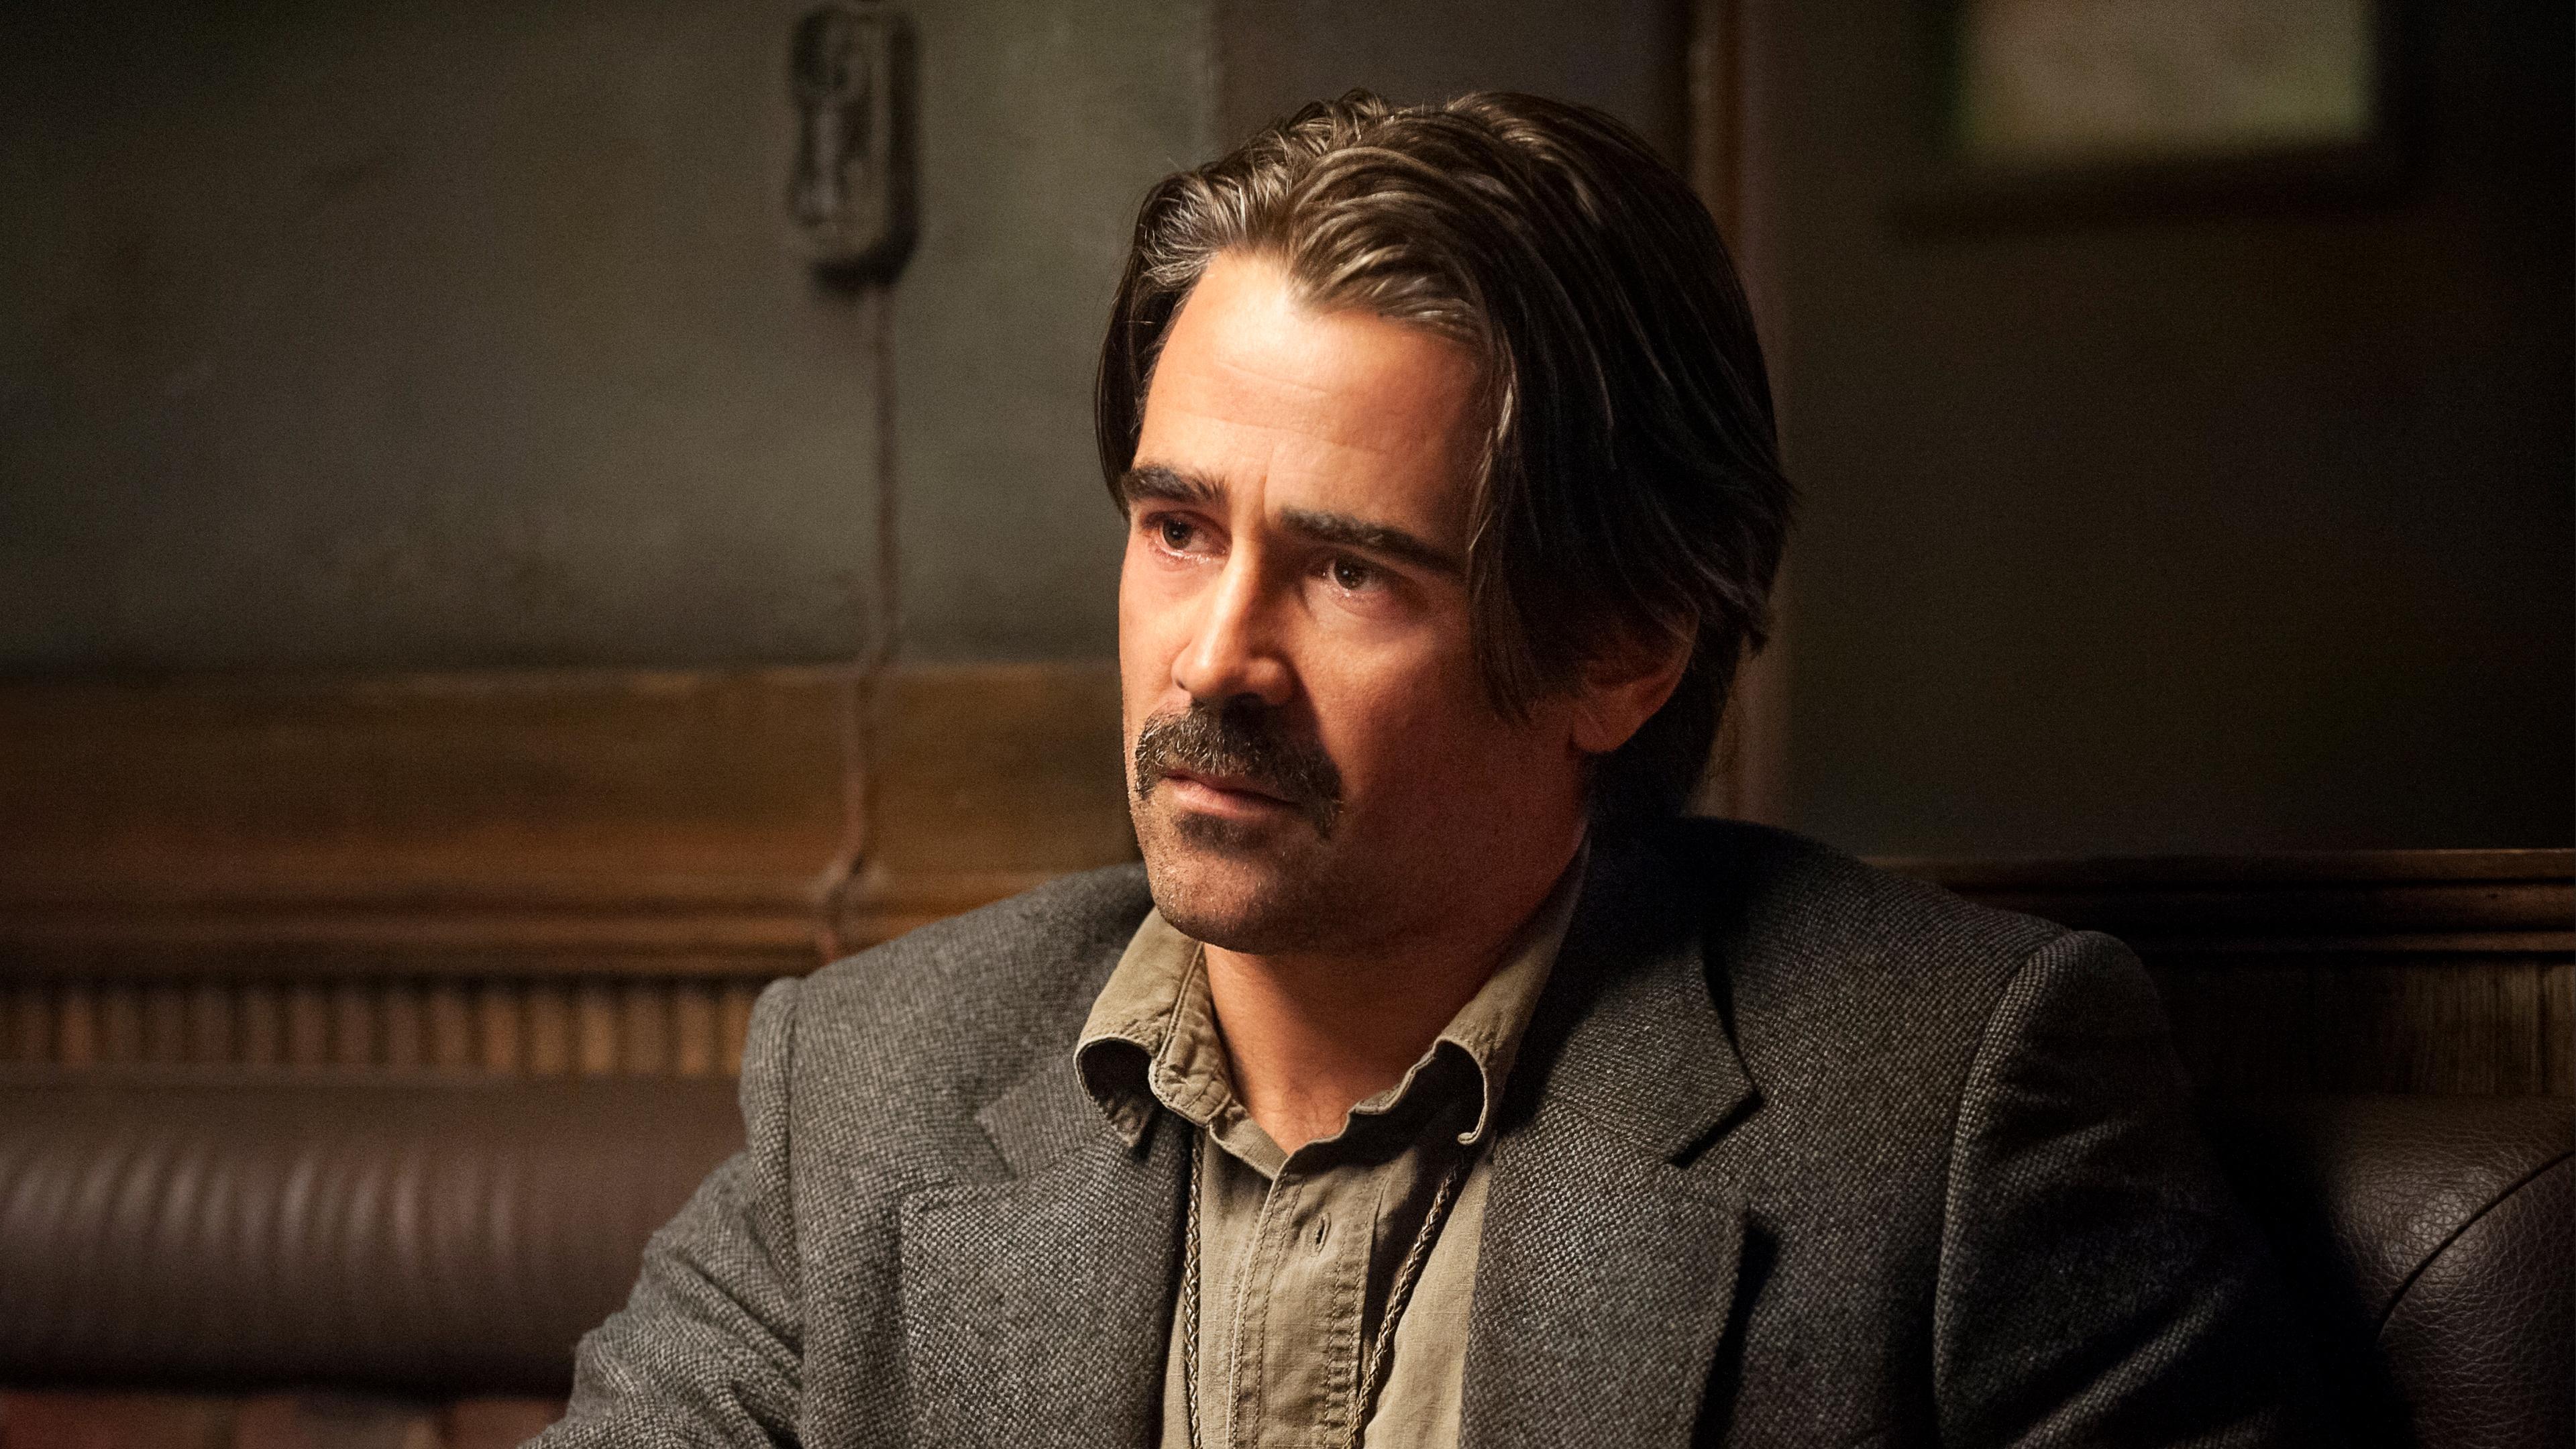 True Detective Season 2 | Official Website for the HBO Series | HBO.com